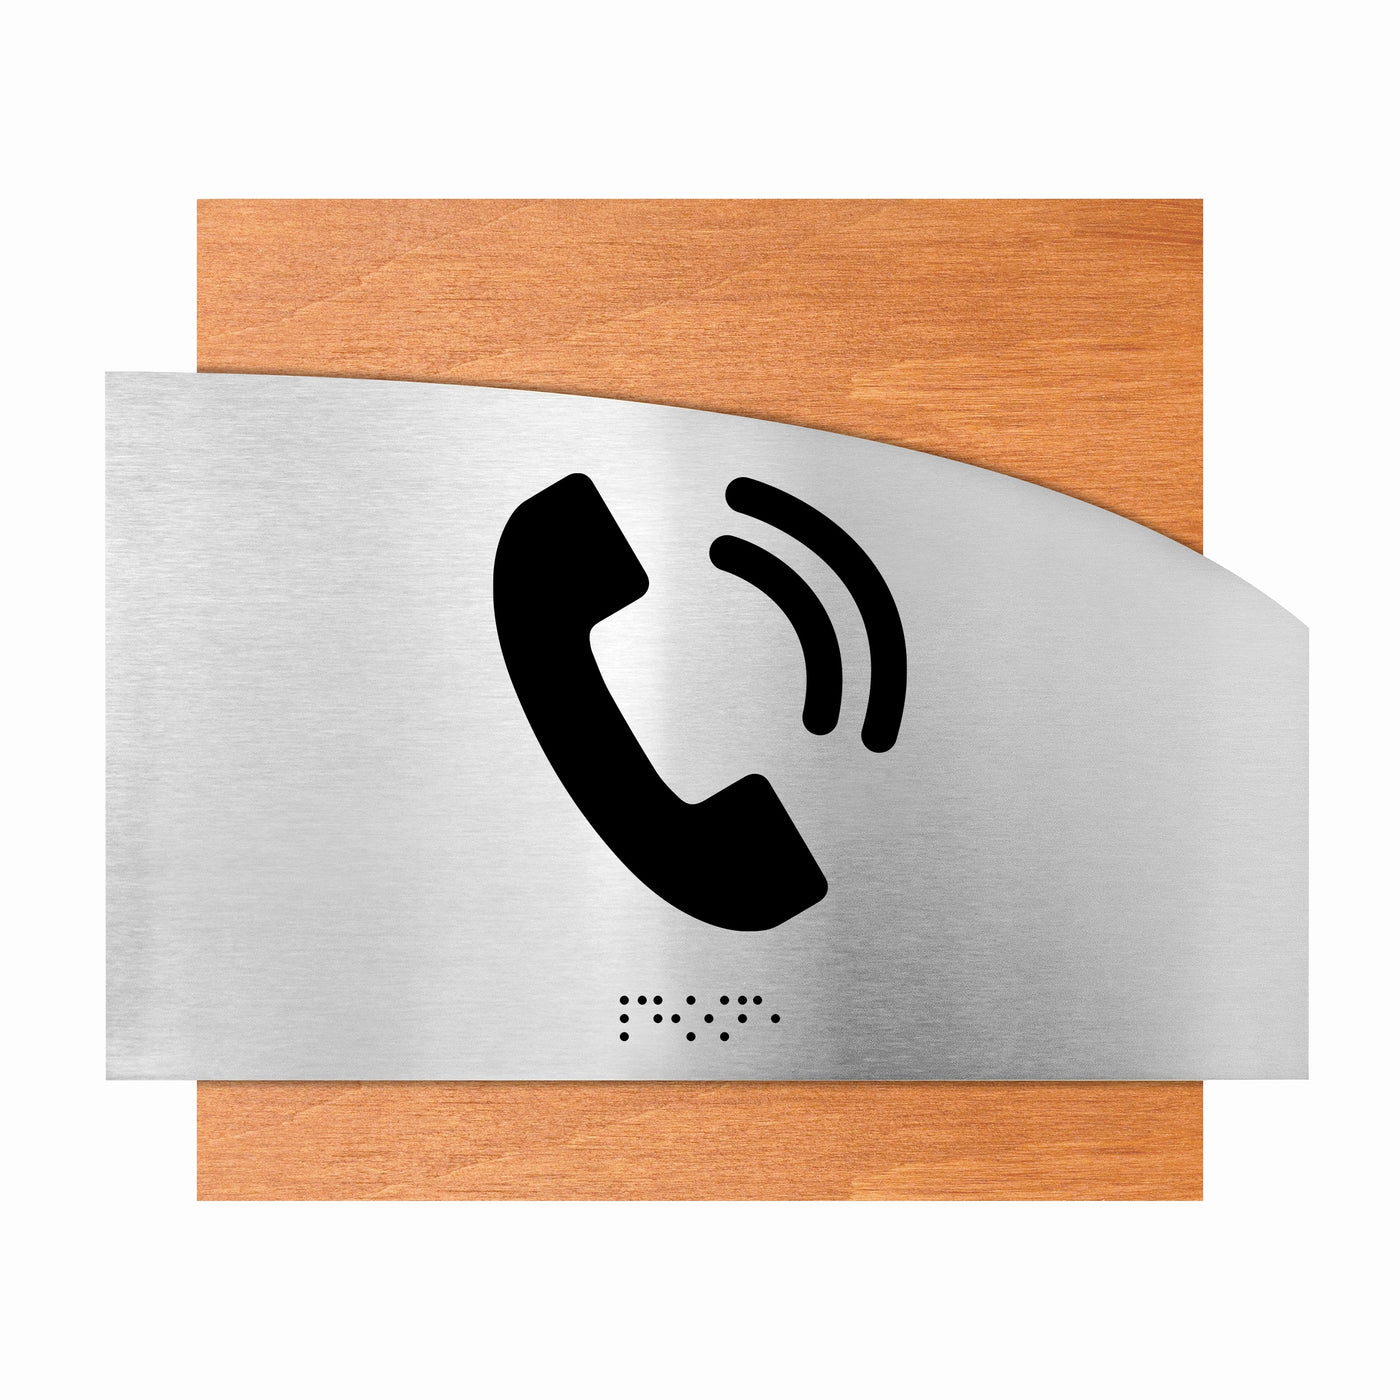 Door Signs - Phone Signs - Wood & Stainless Stee Plate - "Wave" Design